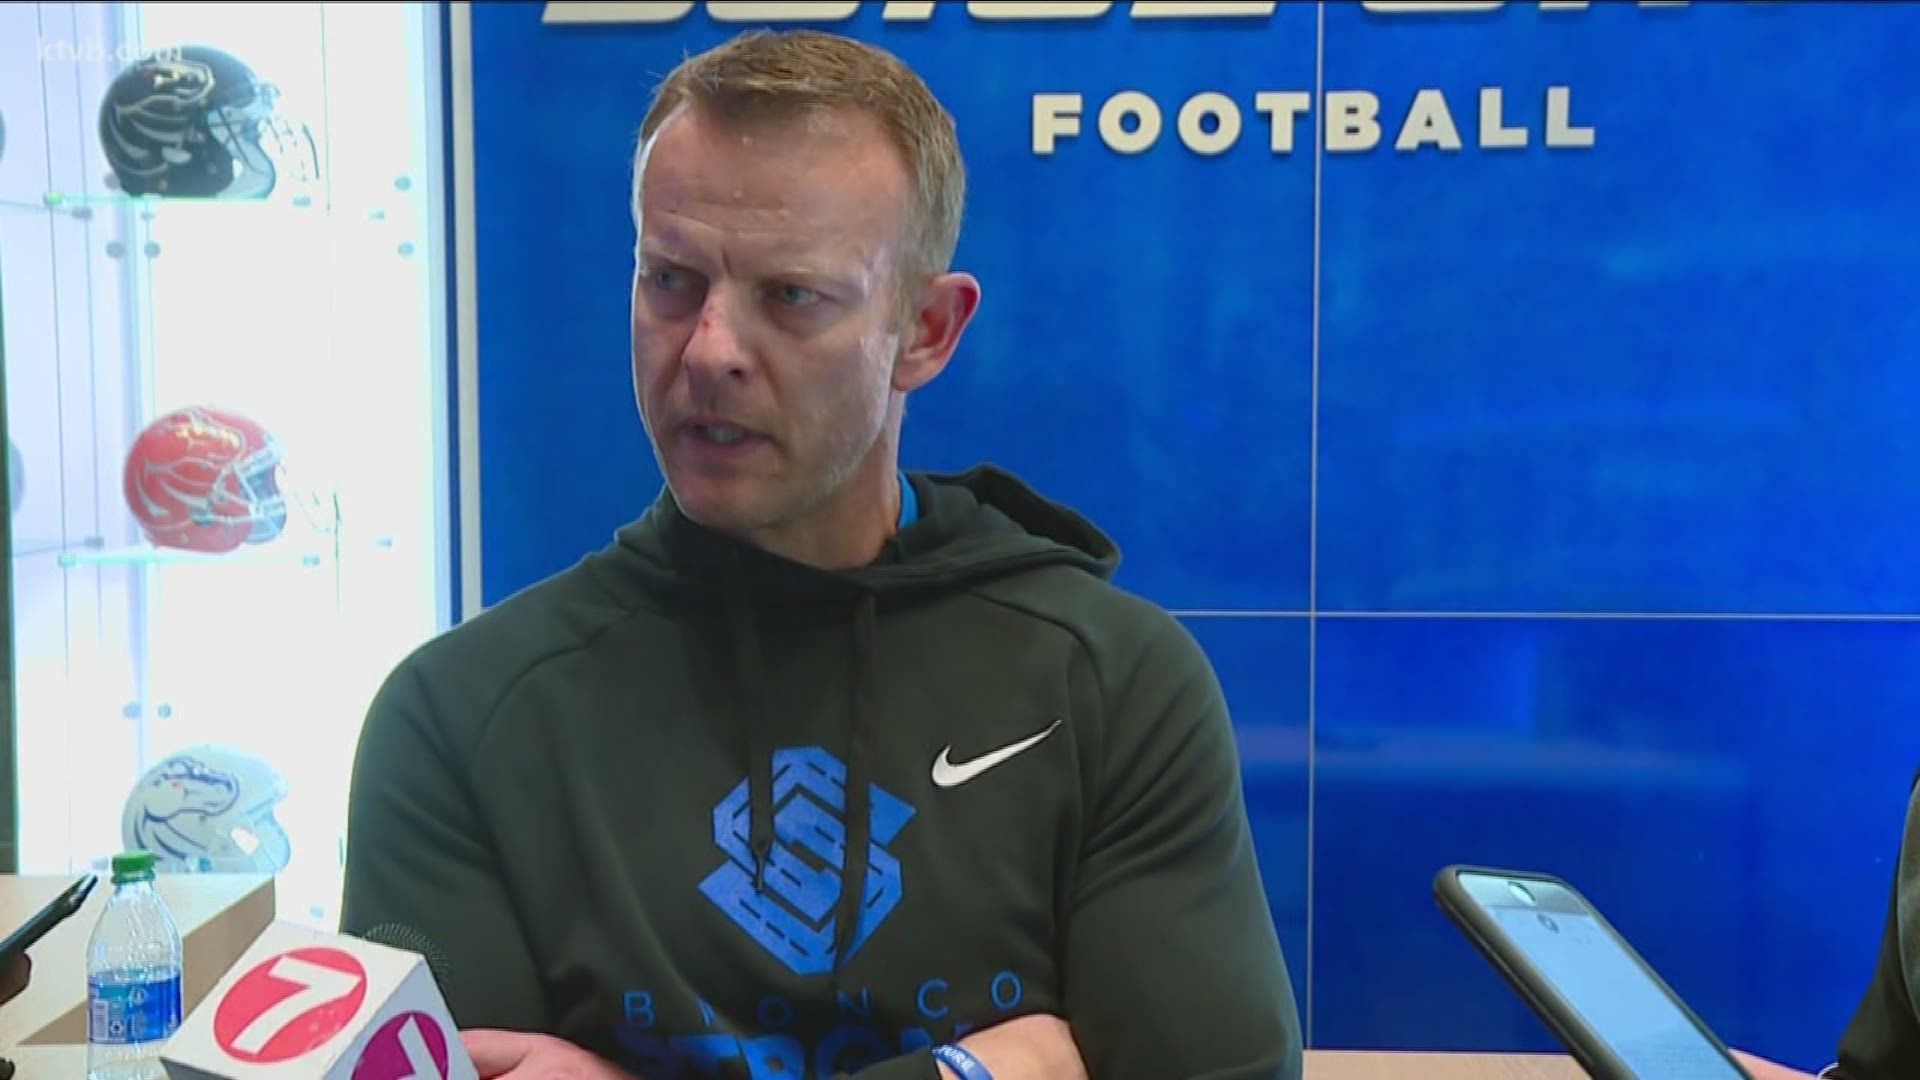 Coach Harsin says the university needs to be more proactive about keeping coordinators and assistant coaches in Boise by expanding the school's budget for coaches.